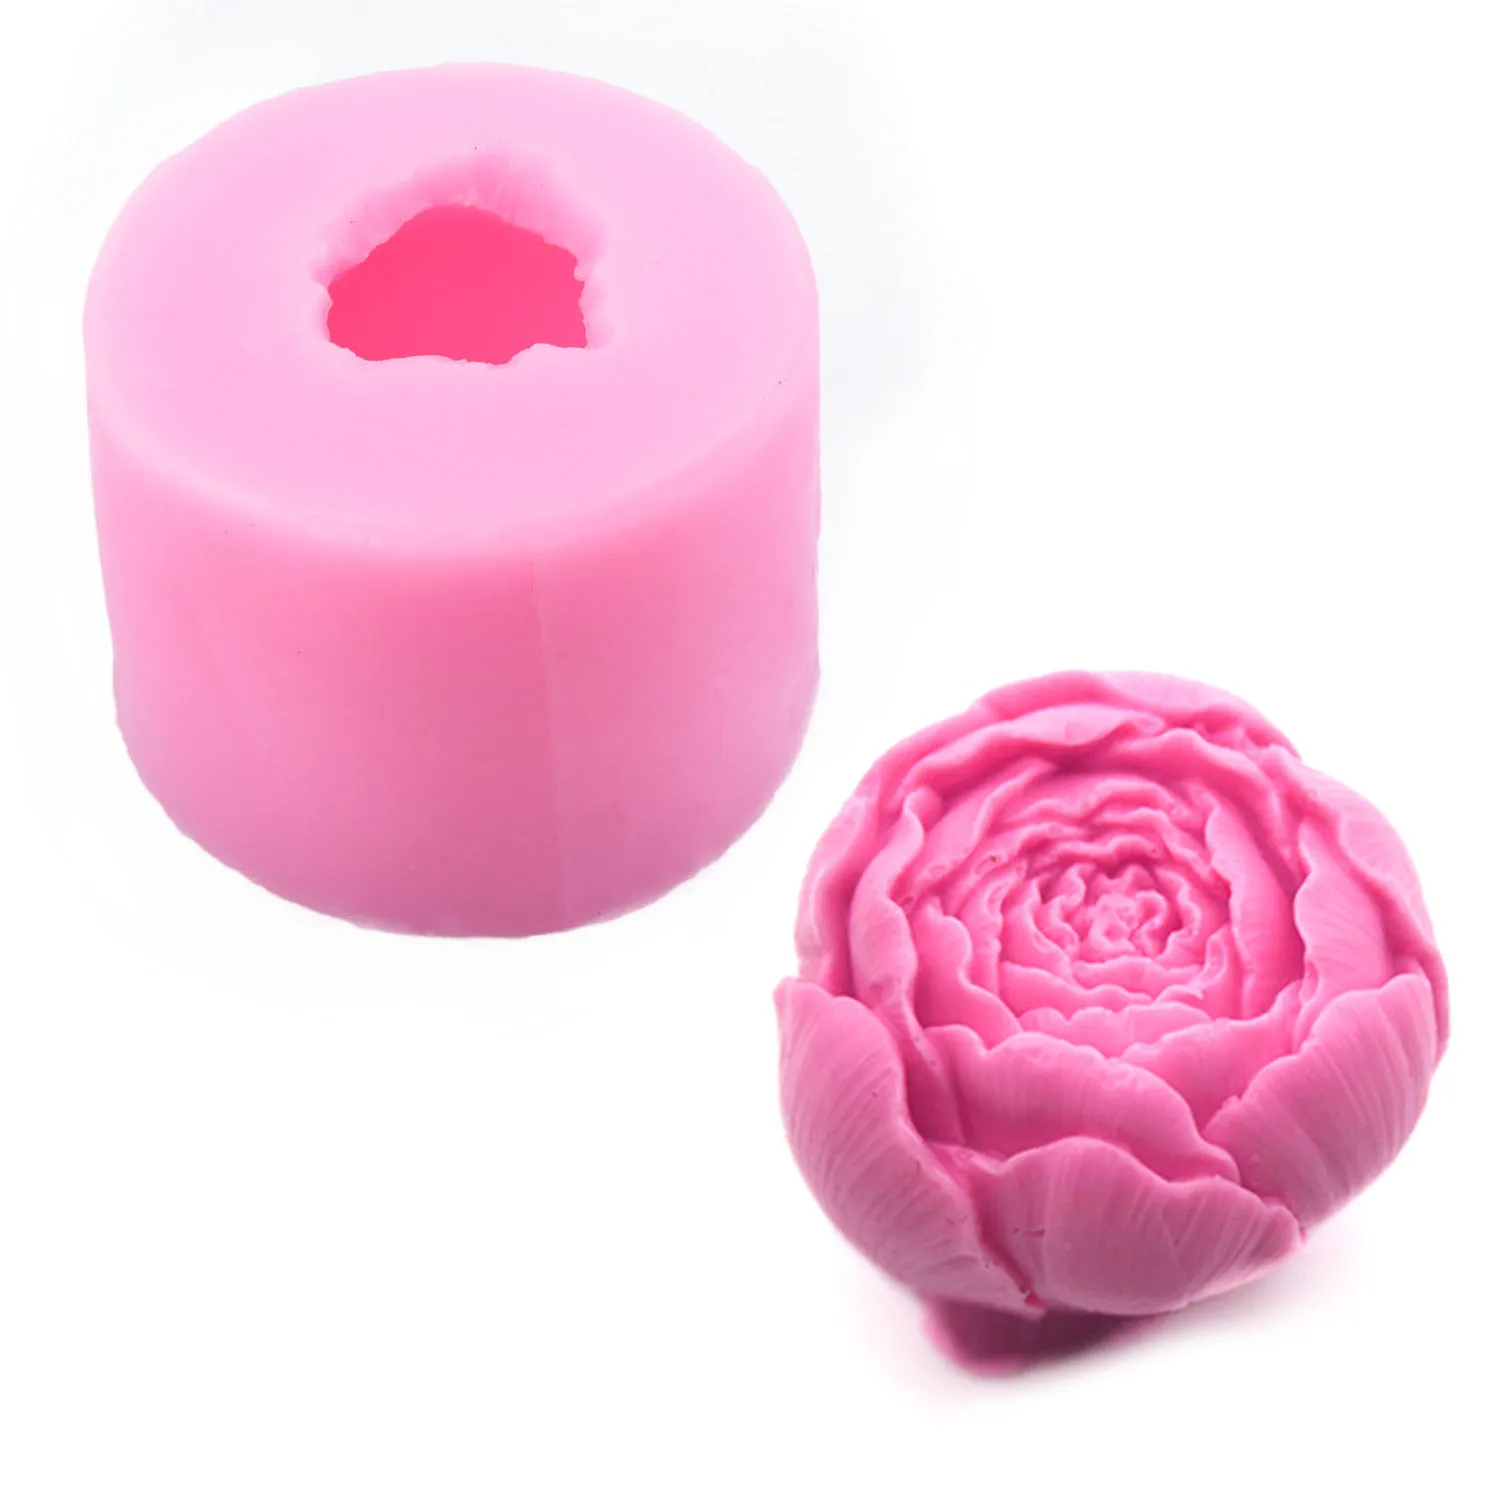 Details about   Flower Silicone Soap Mold Making Fondant 3D Cake Chocolate Mould Form Molds 